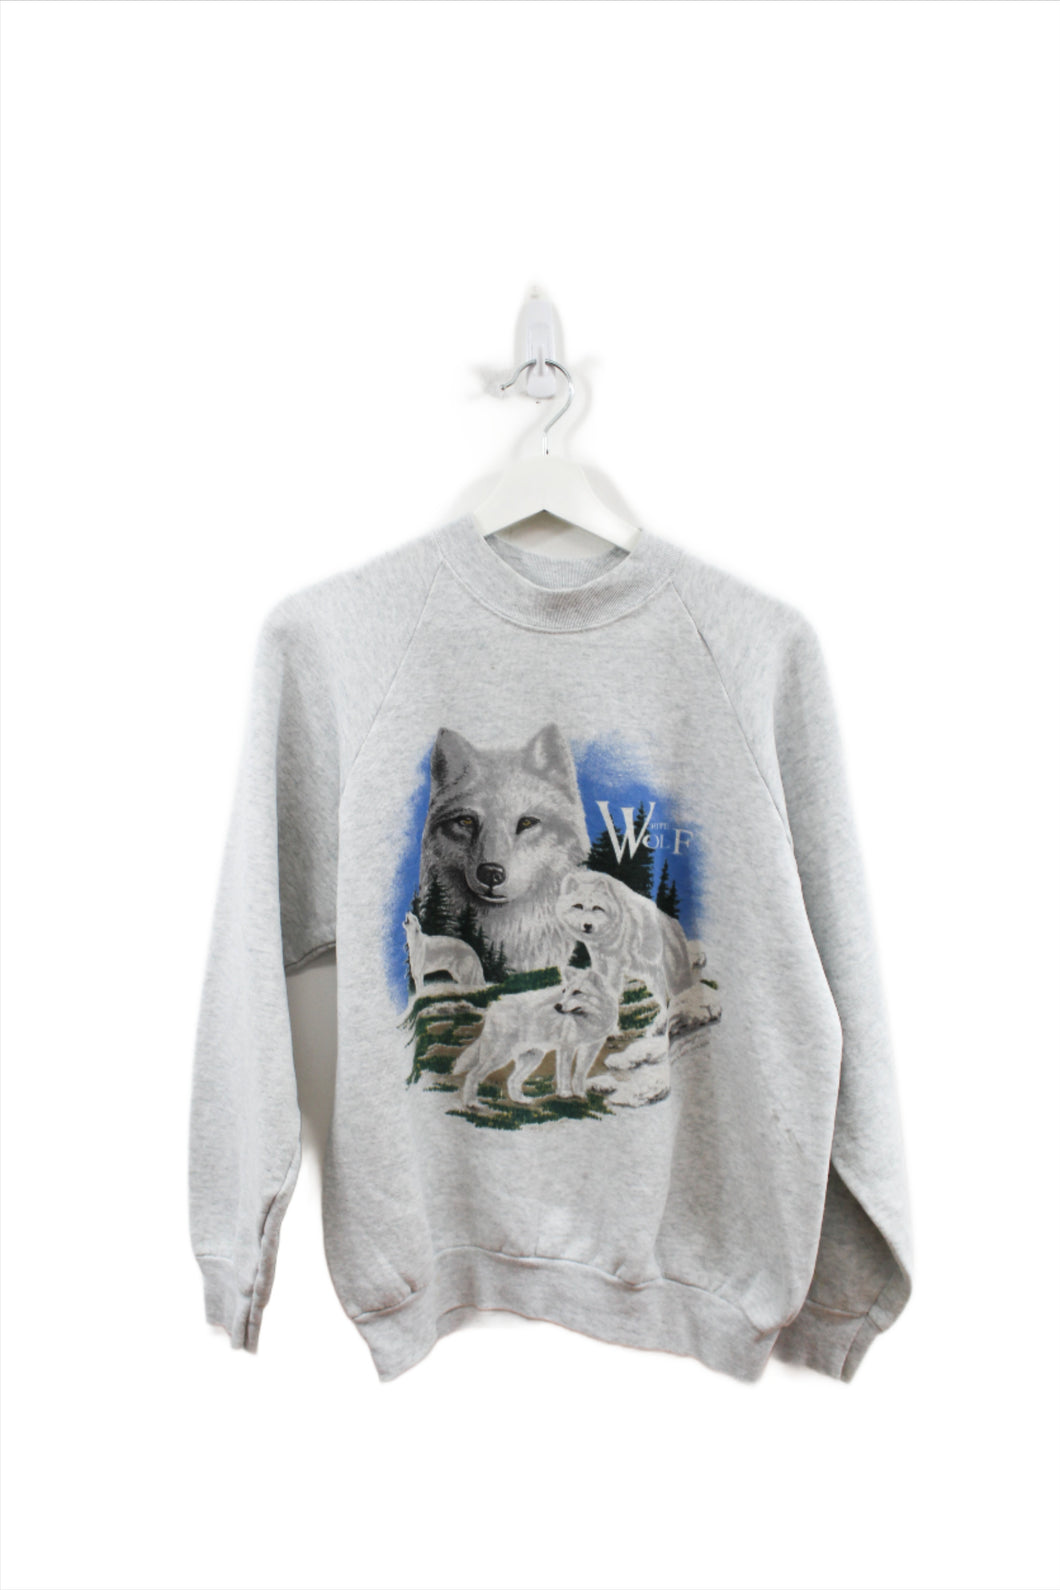 X - Vintage White Wolf 90's Graphic Fruit Of The Loom Crewneck